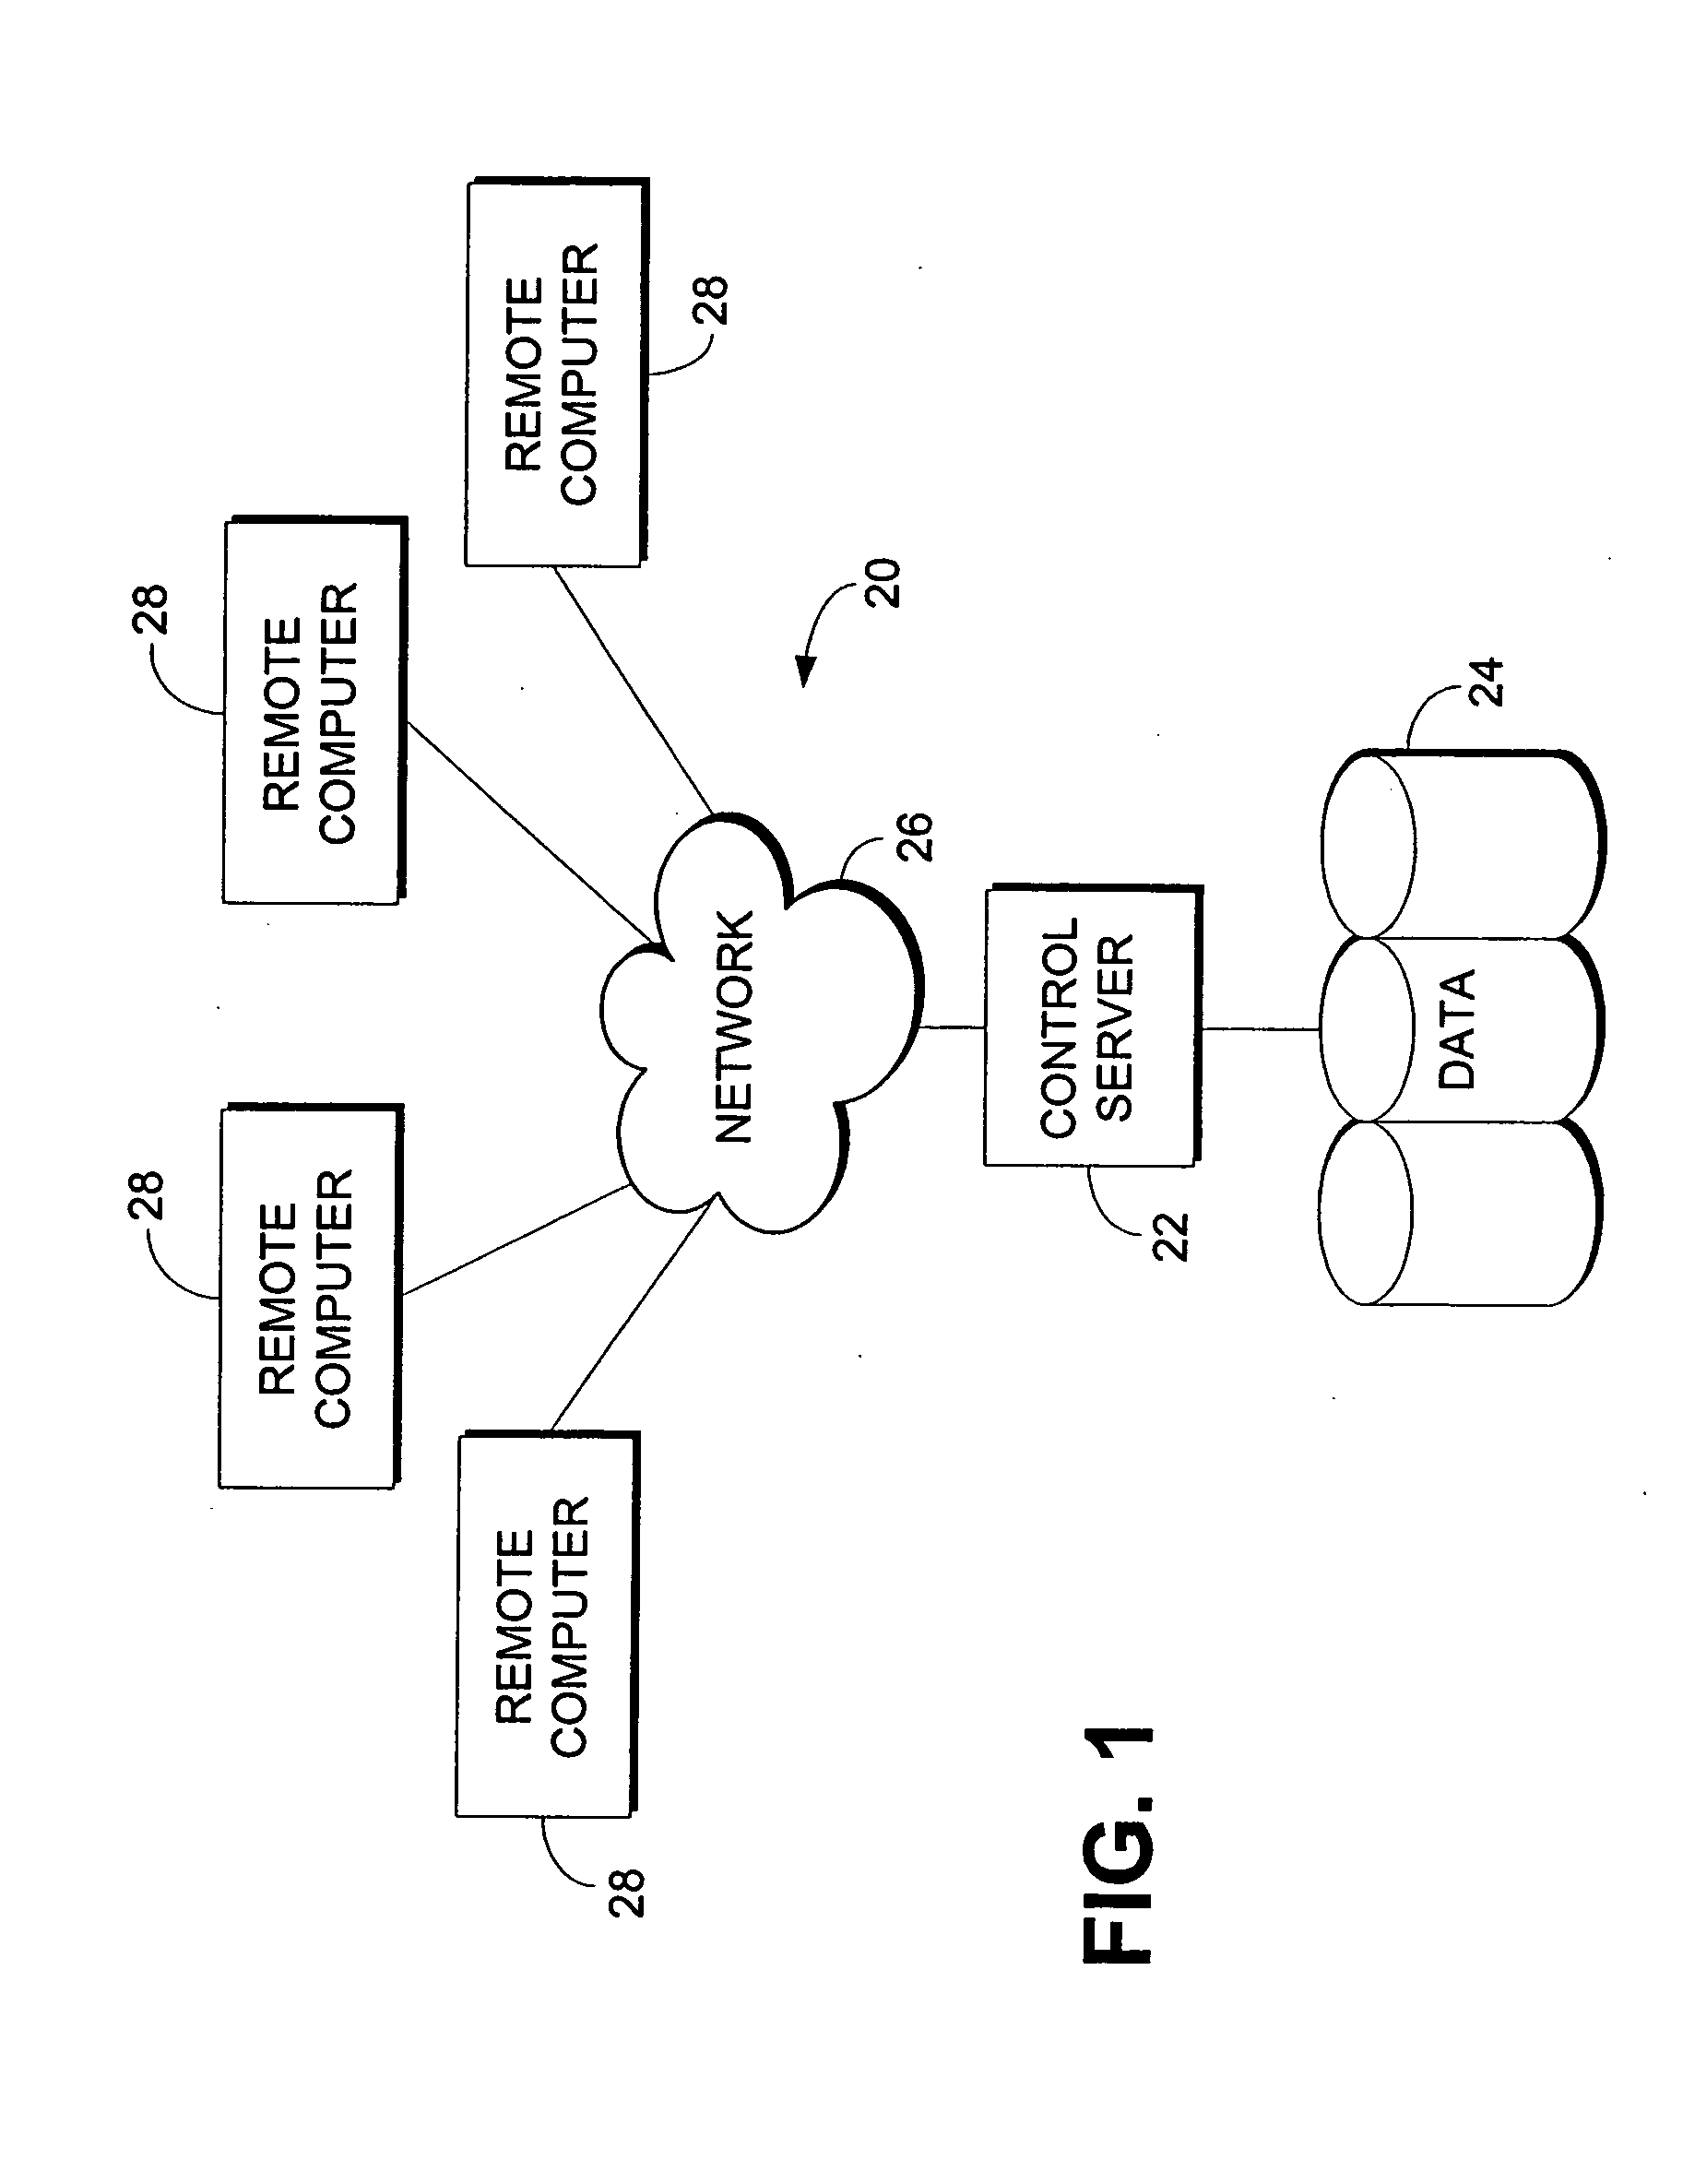 Computerized method and system for inferring genetic findings for a patient